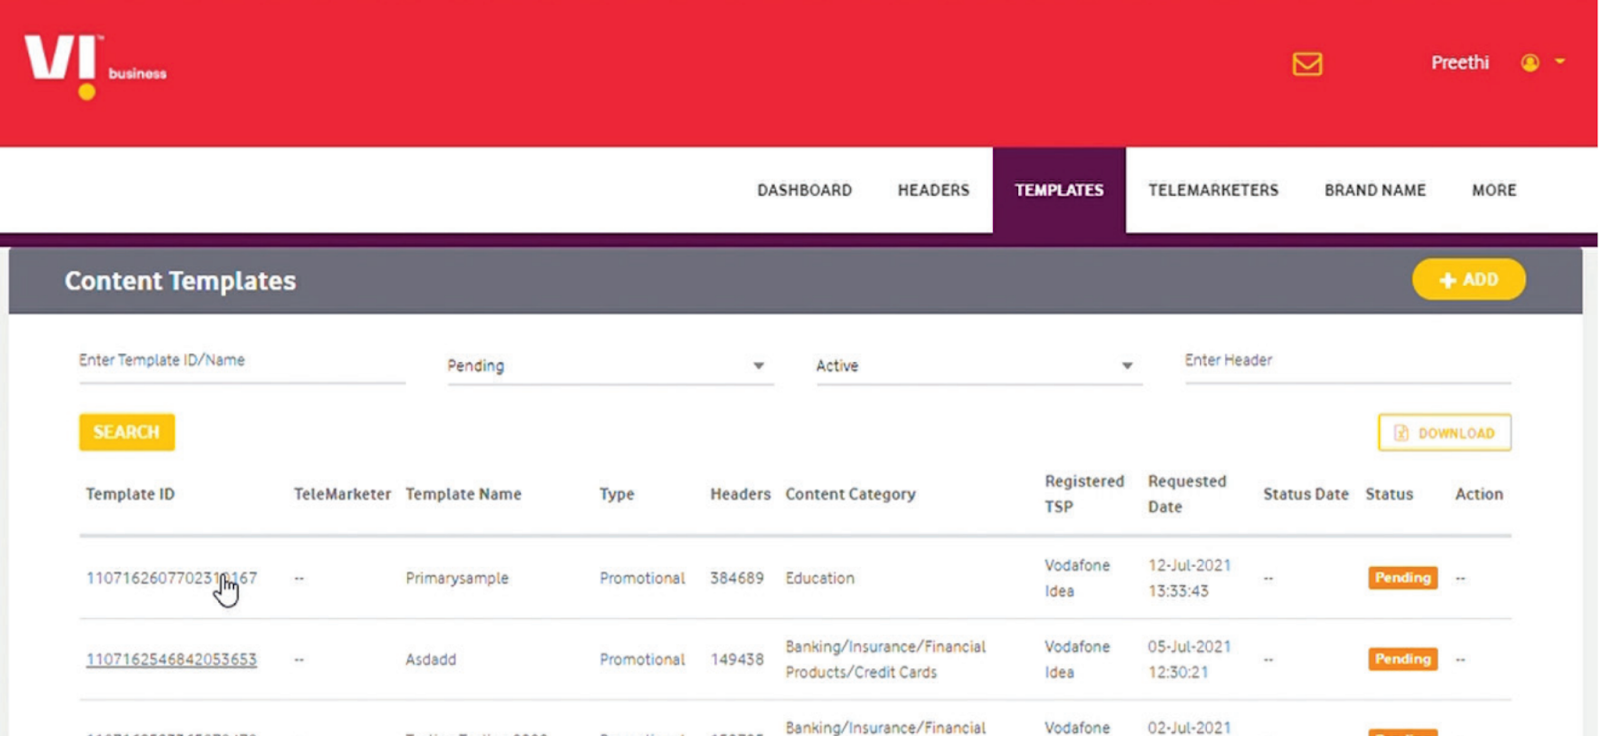 Pending Content template approvals on Vodafone DLT website | SMSCountry